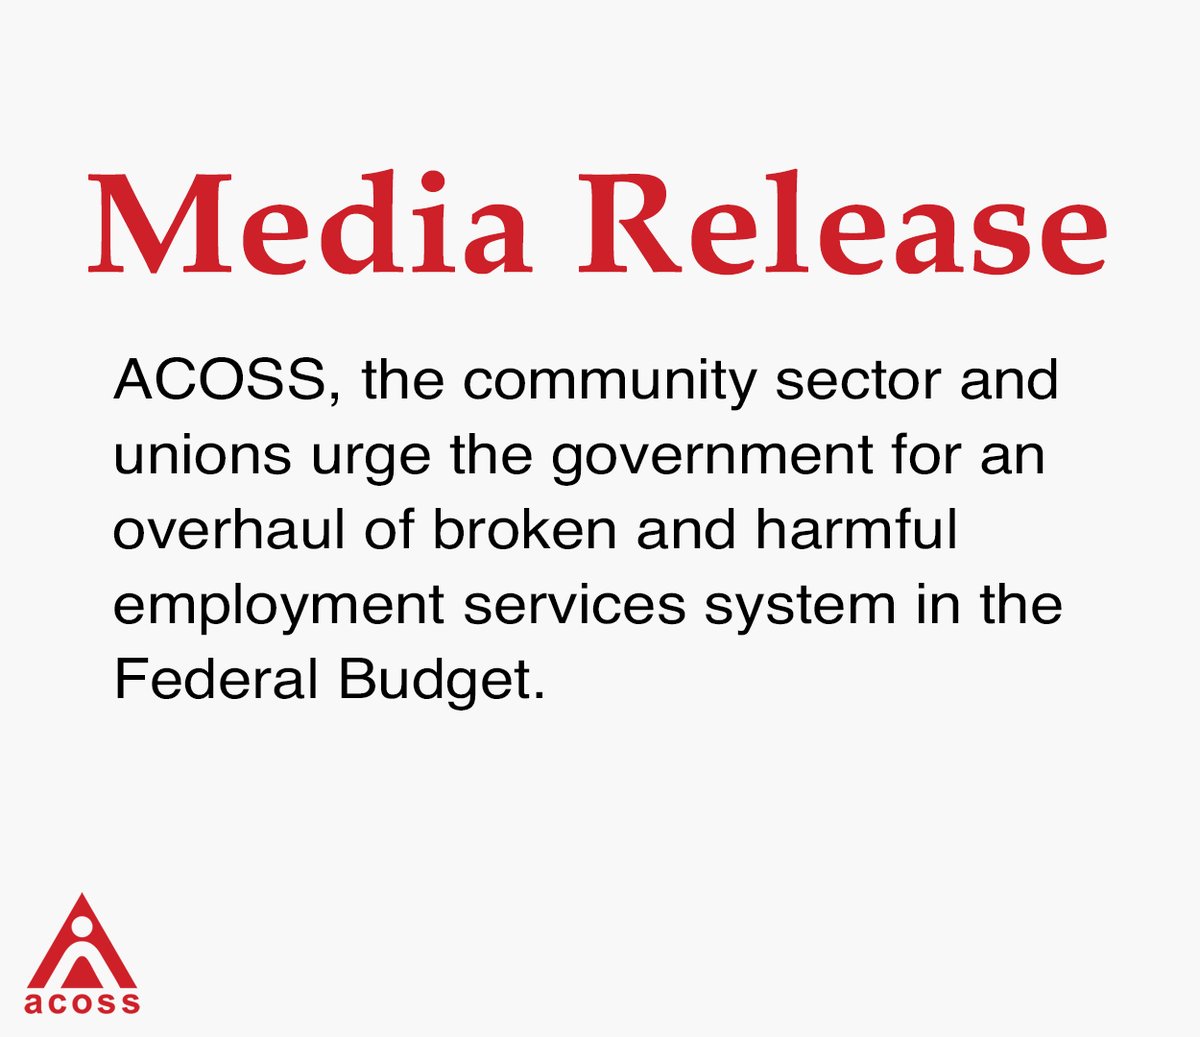 ACOSS, the community sector and trade unions are urging the federal government to commit to wholesale reform of the broken and harmful employment services system in next month’s budget. Media Release: bit.ly/44kSCoD Letter: bit.ly/3JCRKCc #Budget2024 #Auspol